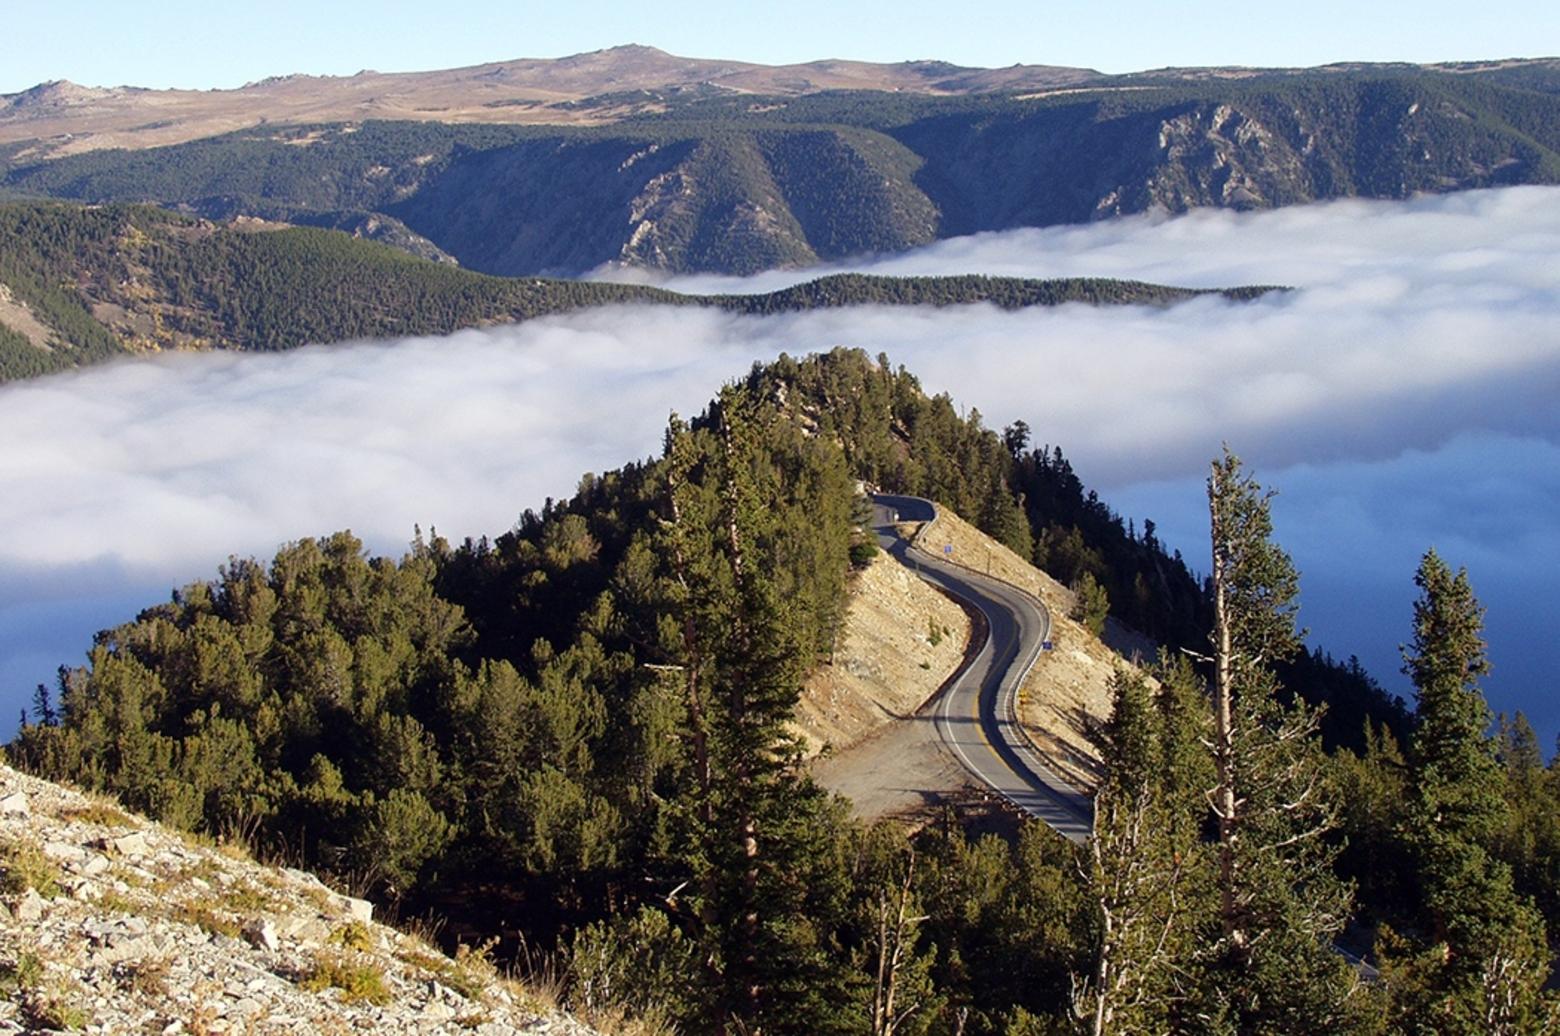 The Custer-Gallatin National Forest covers several extraordinary mountain ranges, including the mighty Absarakas. Here is the Beartooth Highway considered one of the most scenic drives in the world.  Image courtesy US Forest Service